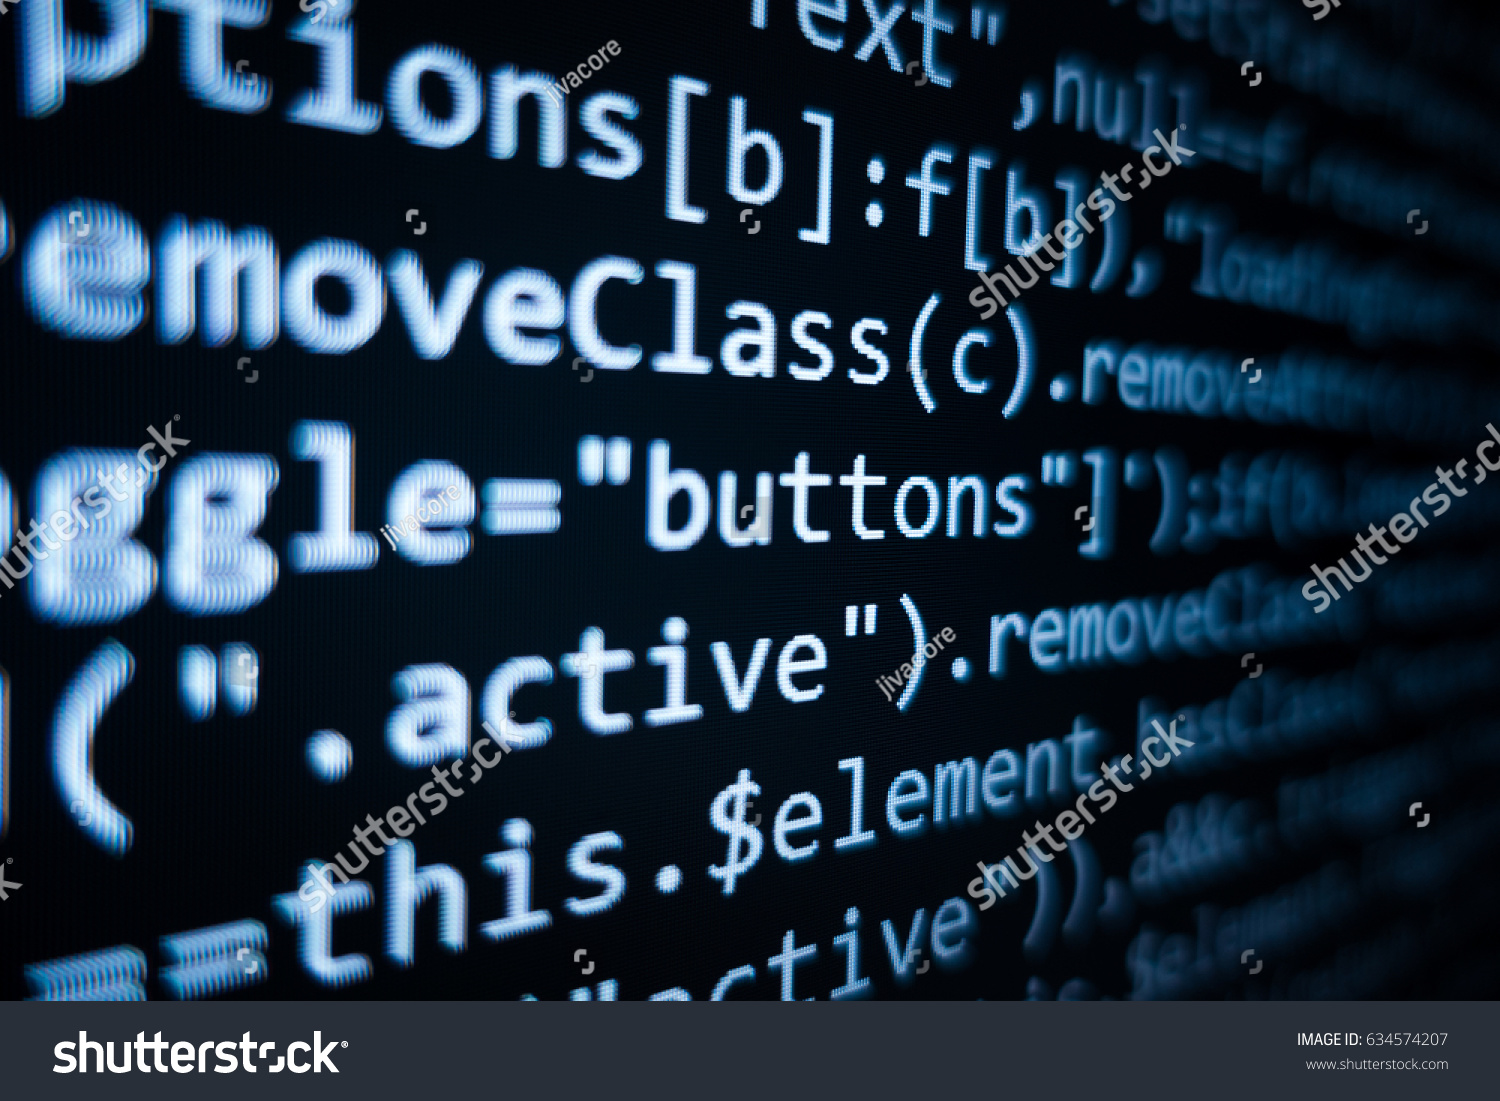 Software source code. Programming code. Programming code on computer screen. Developer working on program codes in office. Source code photo. Technology background. #634574207